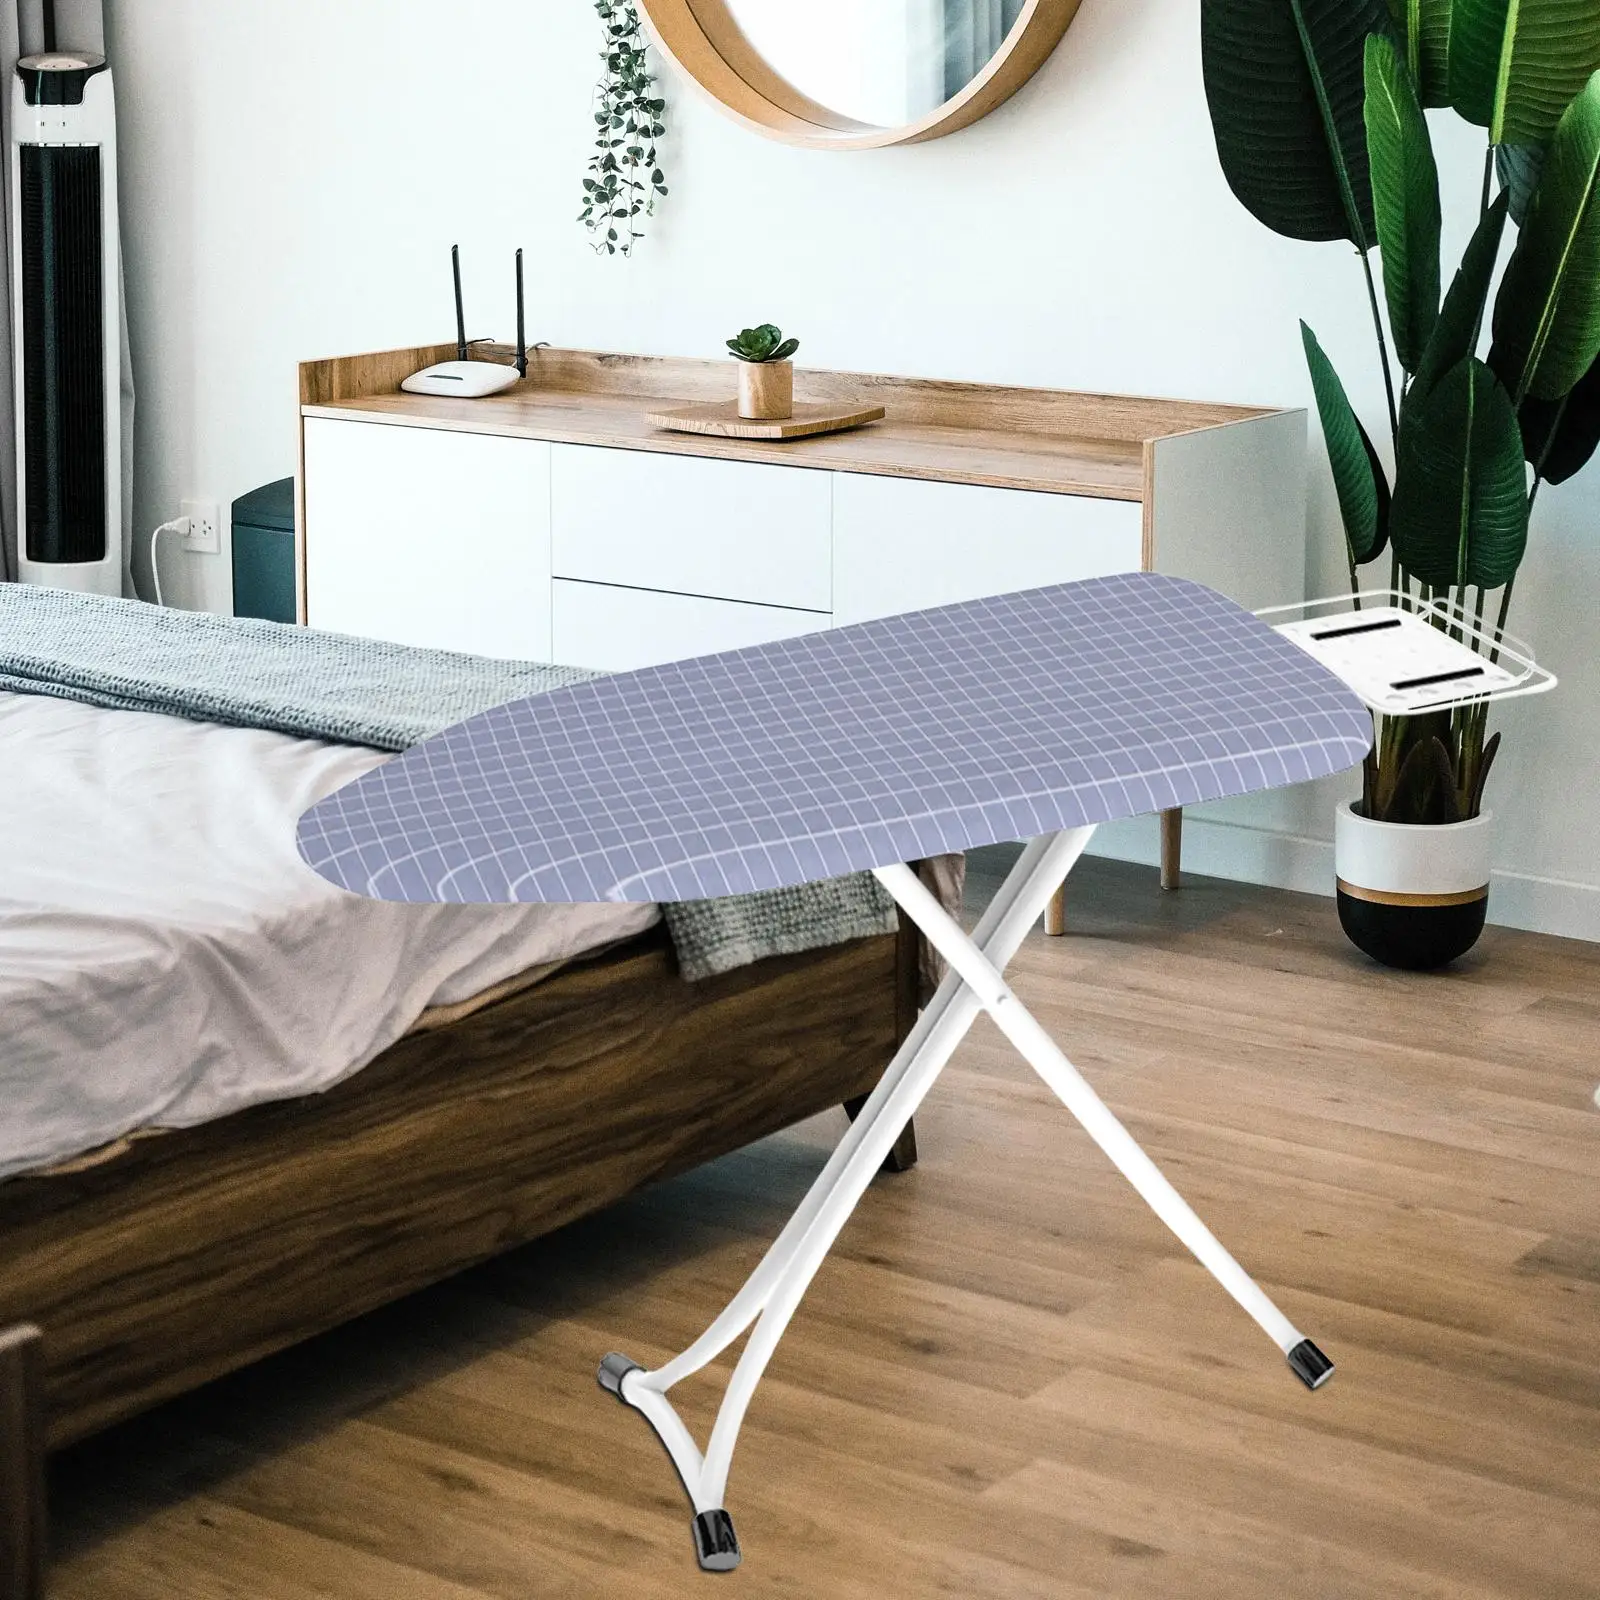 Ironing Board Padded Cover Durable Soft Ironing Board Cover for Replacement Room